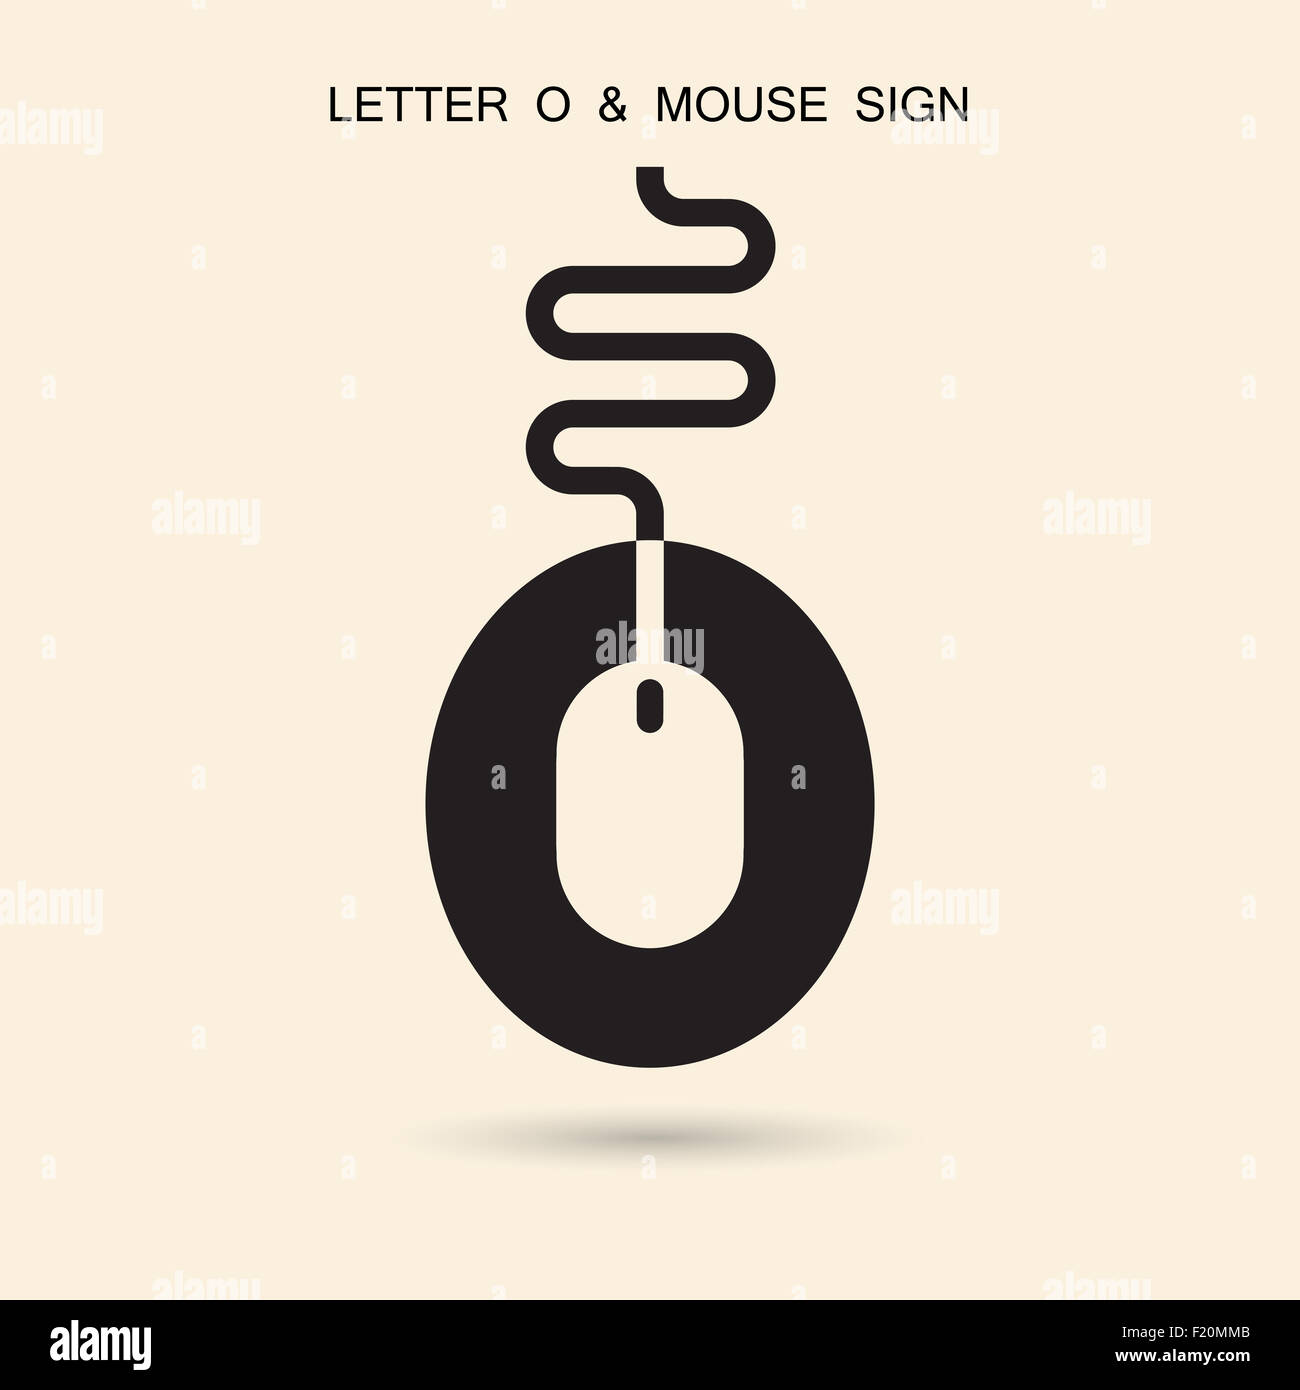 Creative letter O icon abstract logo design template with computer mouse symbol. Stock Photo